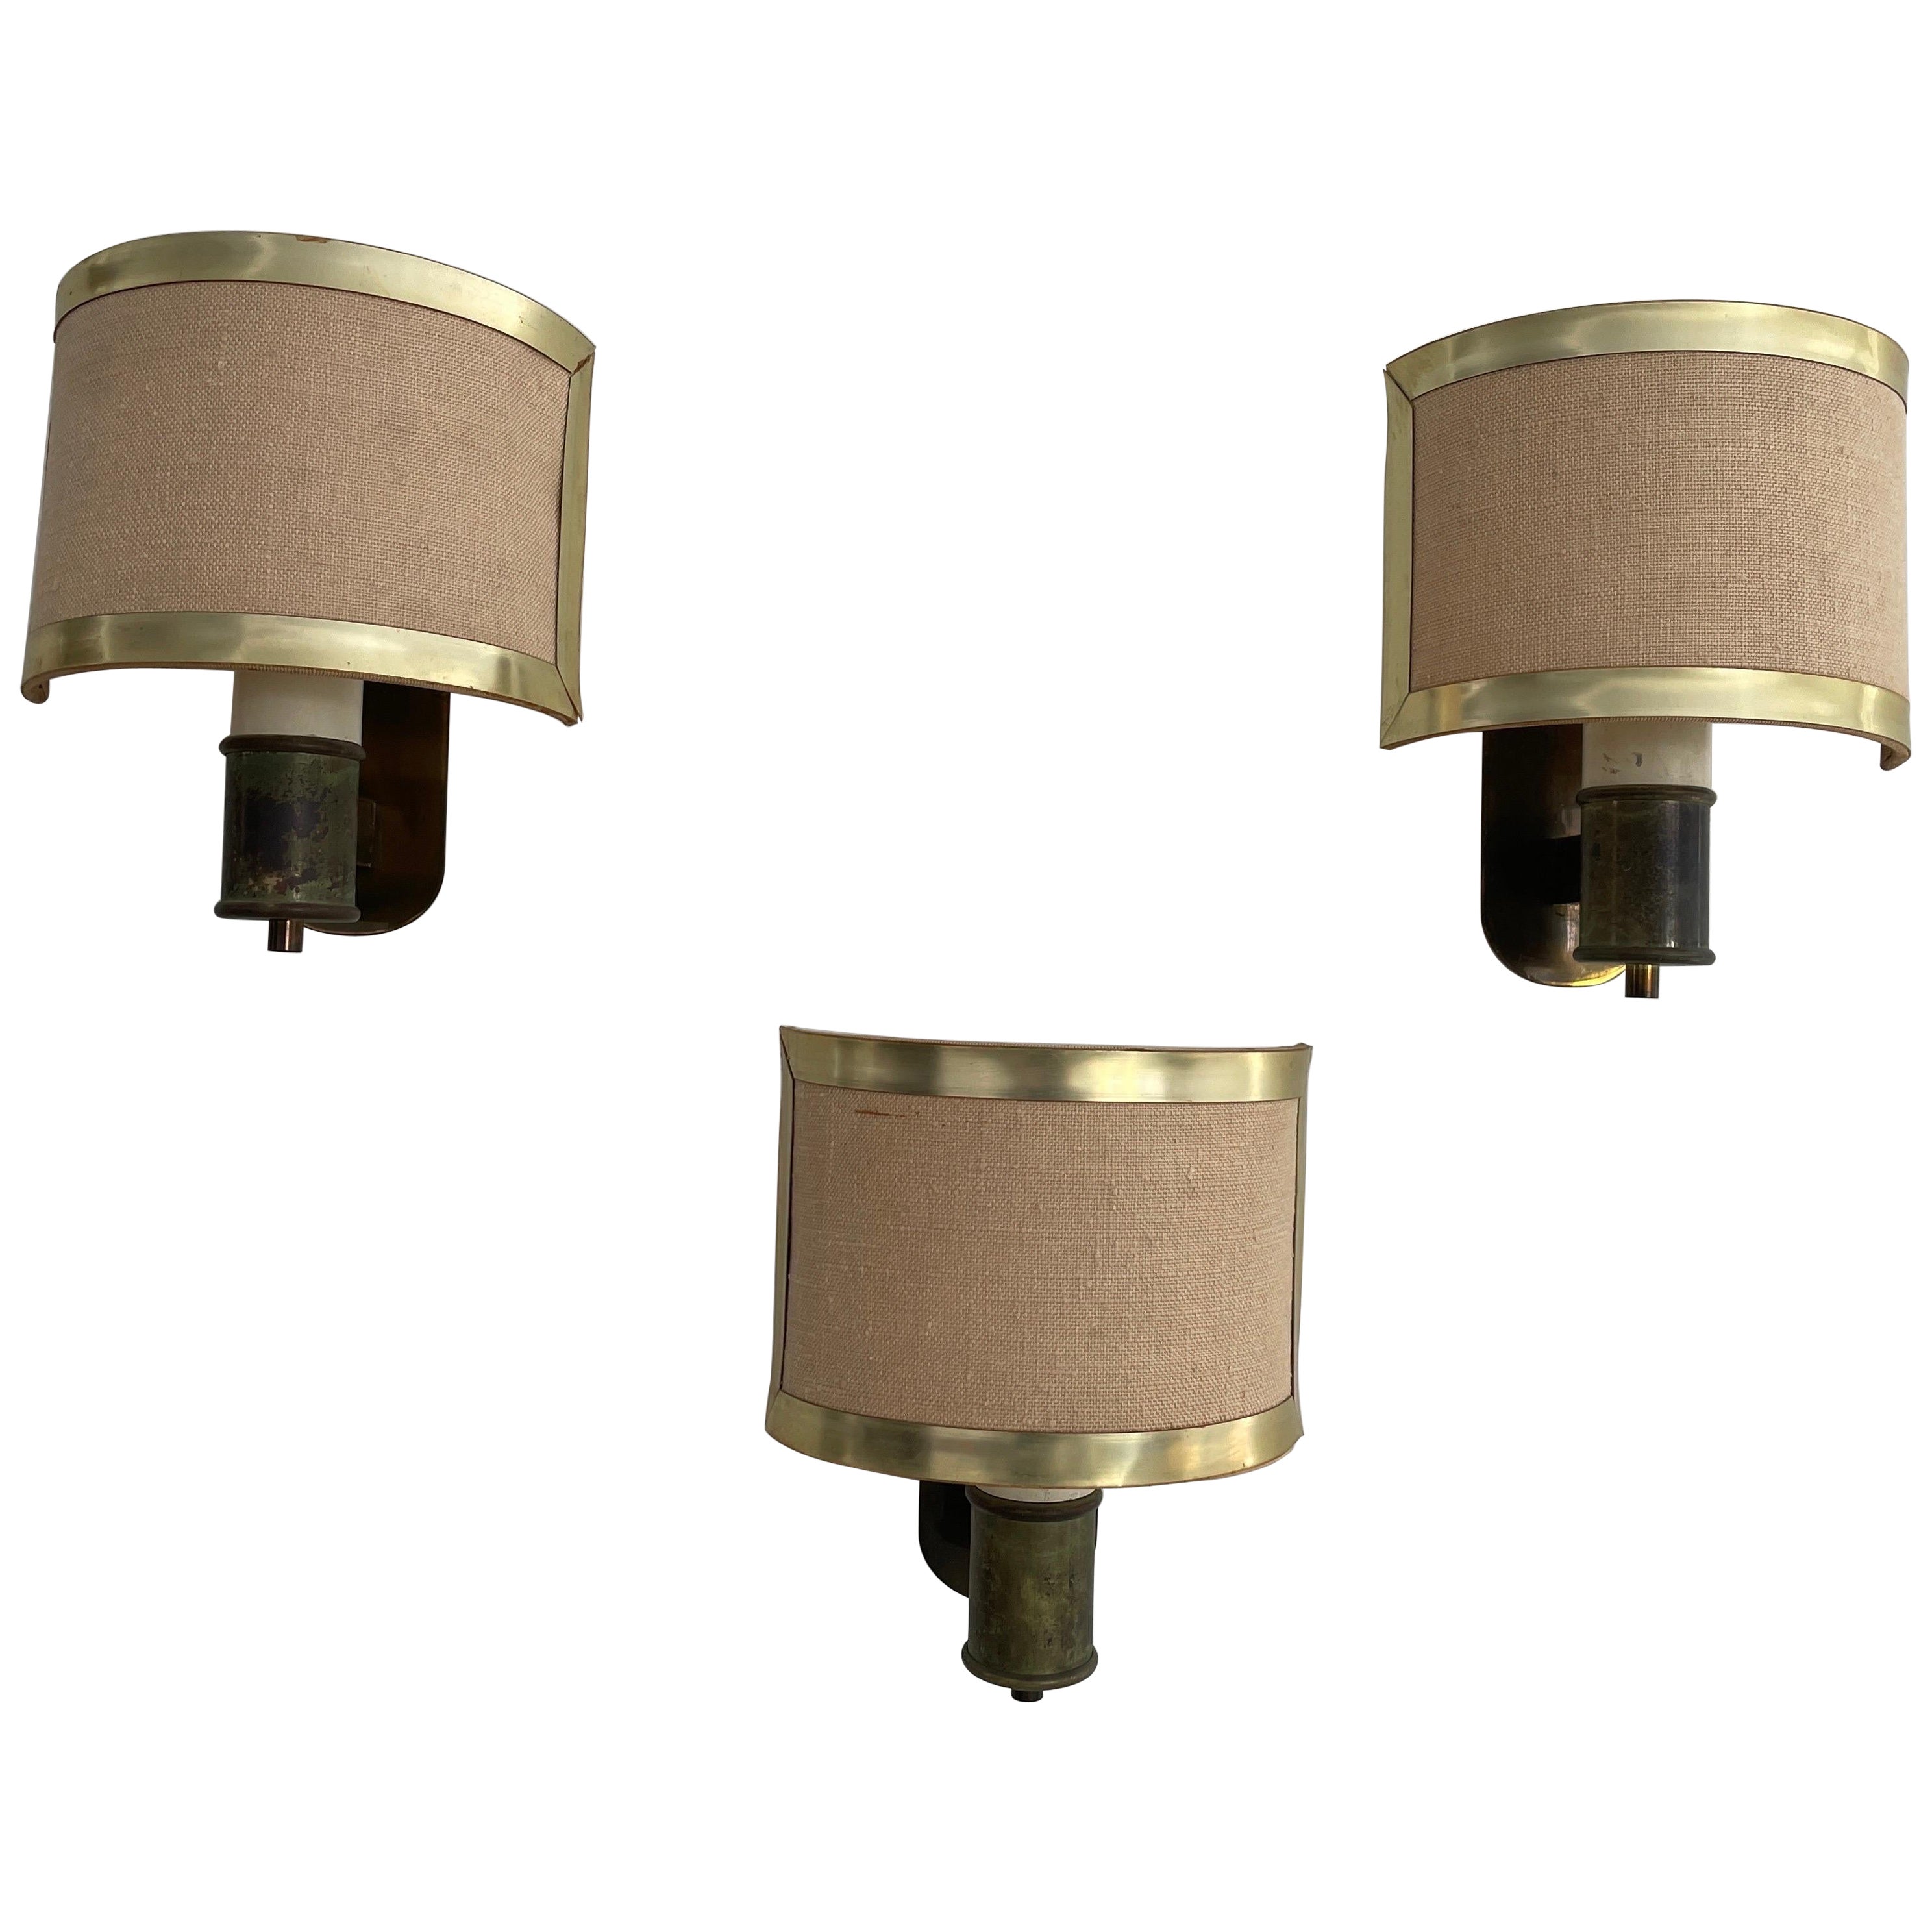 Mid-century Modern Fabric and Brass Set of 3 Sconces, 1960s, Italy For Sale